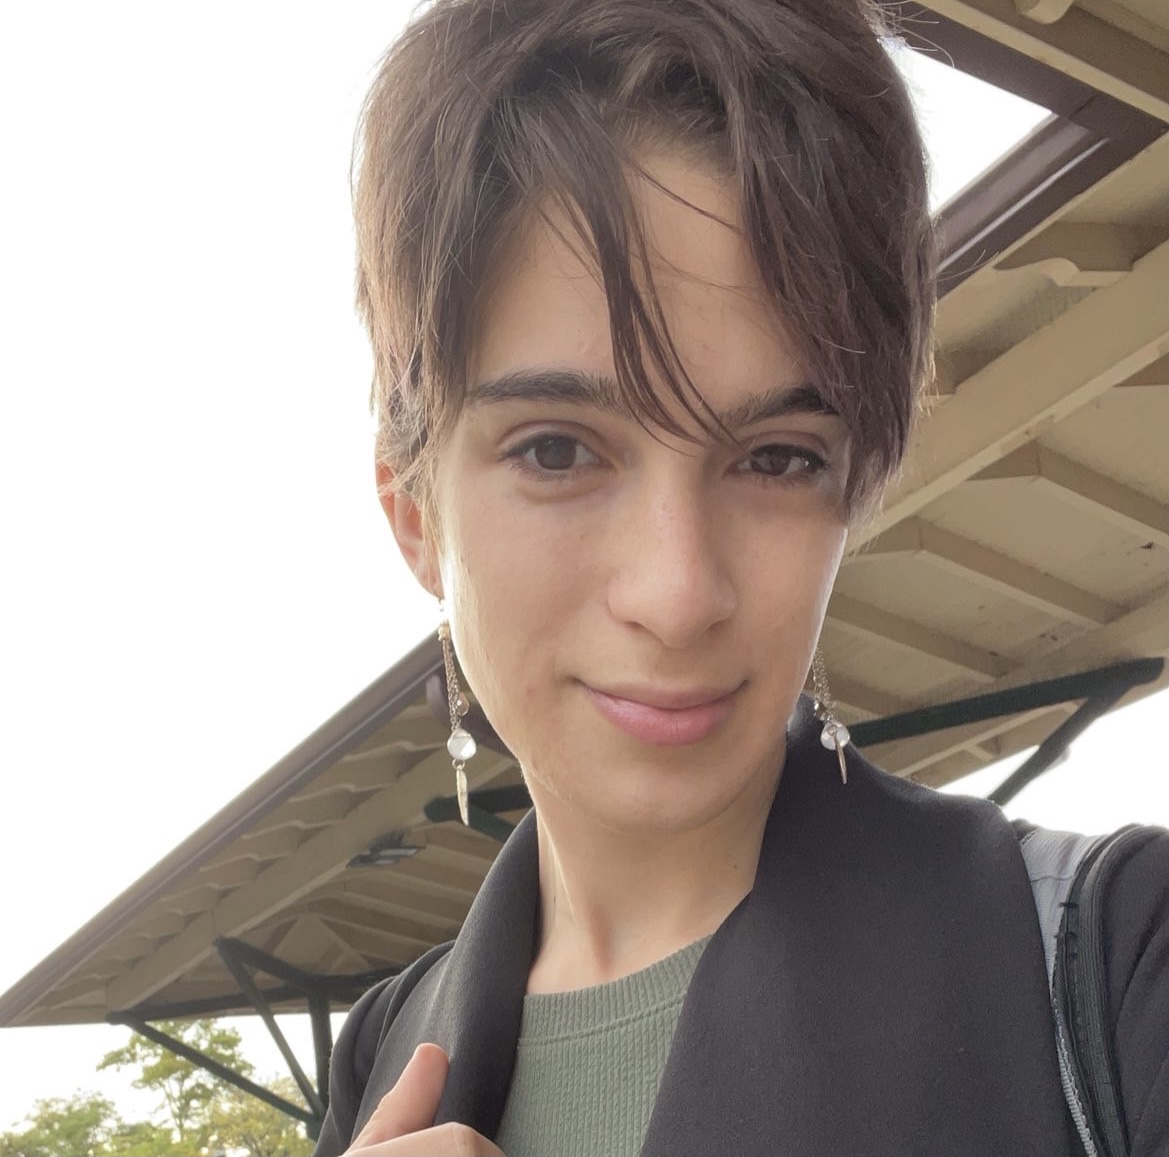 Arielle Rebekah, a white trans feminine person with short brown hair, pictured from the chest-up and wearing a black coat and green dress.